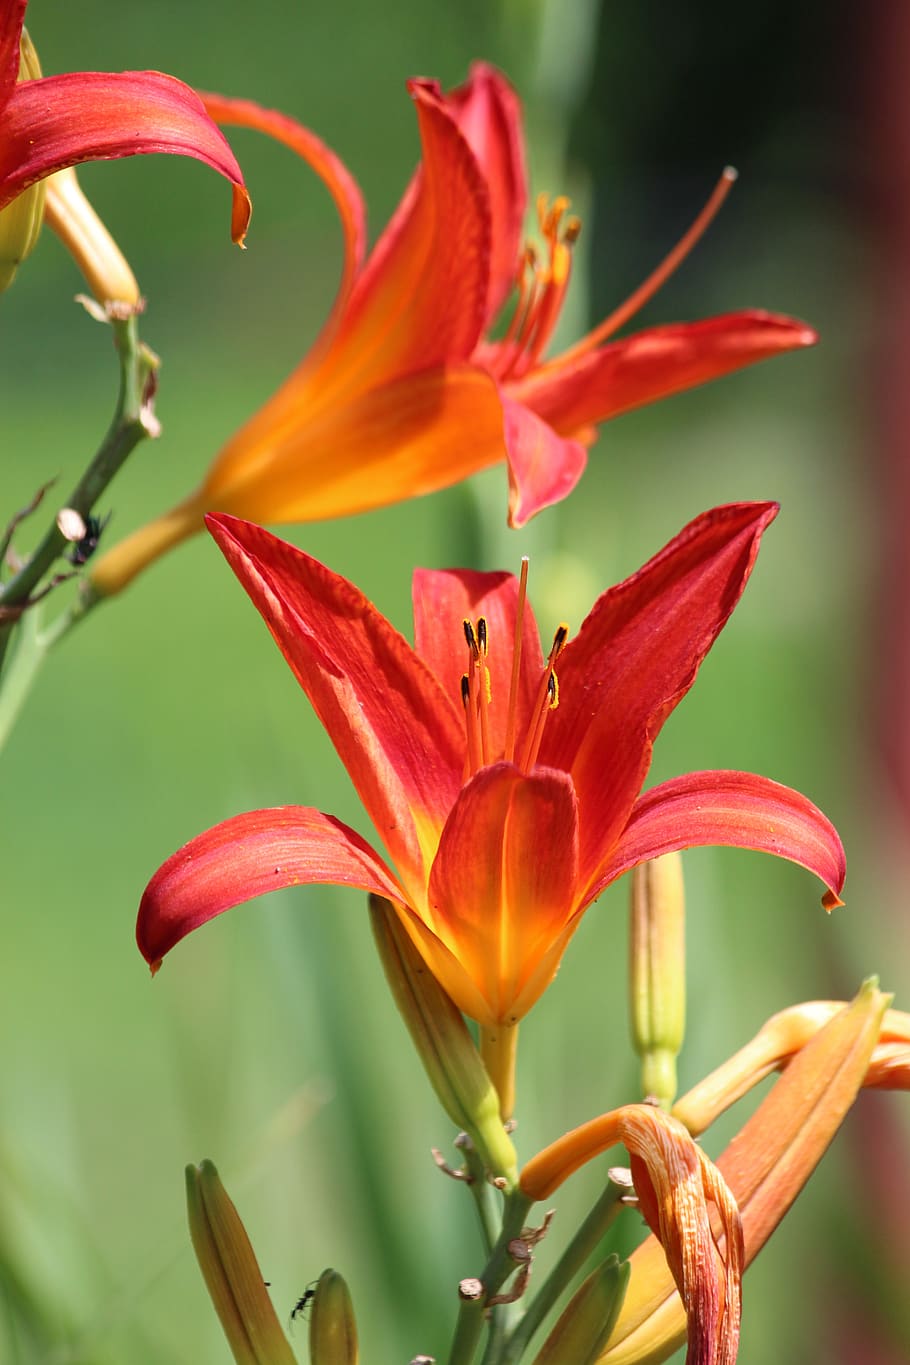 red lily flower wallpaper